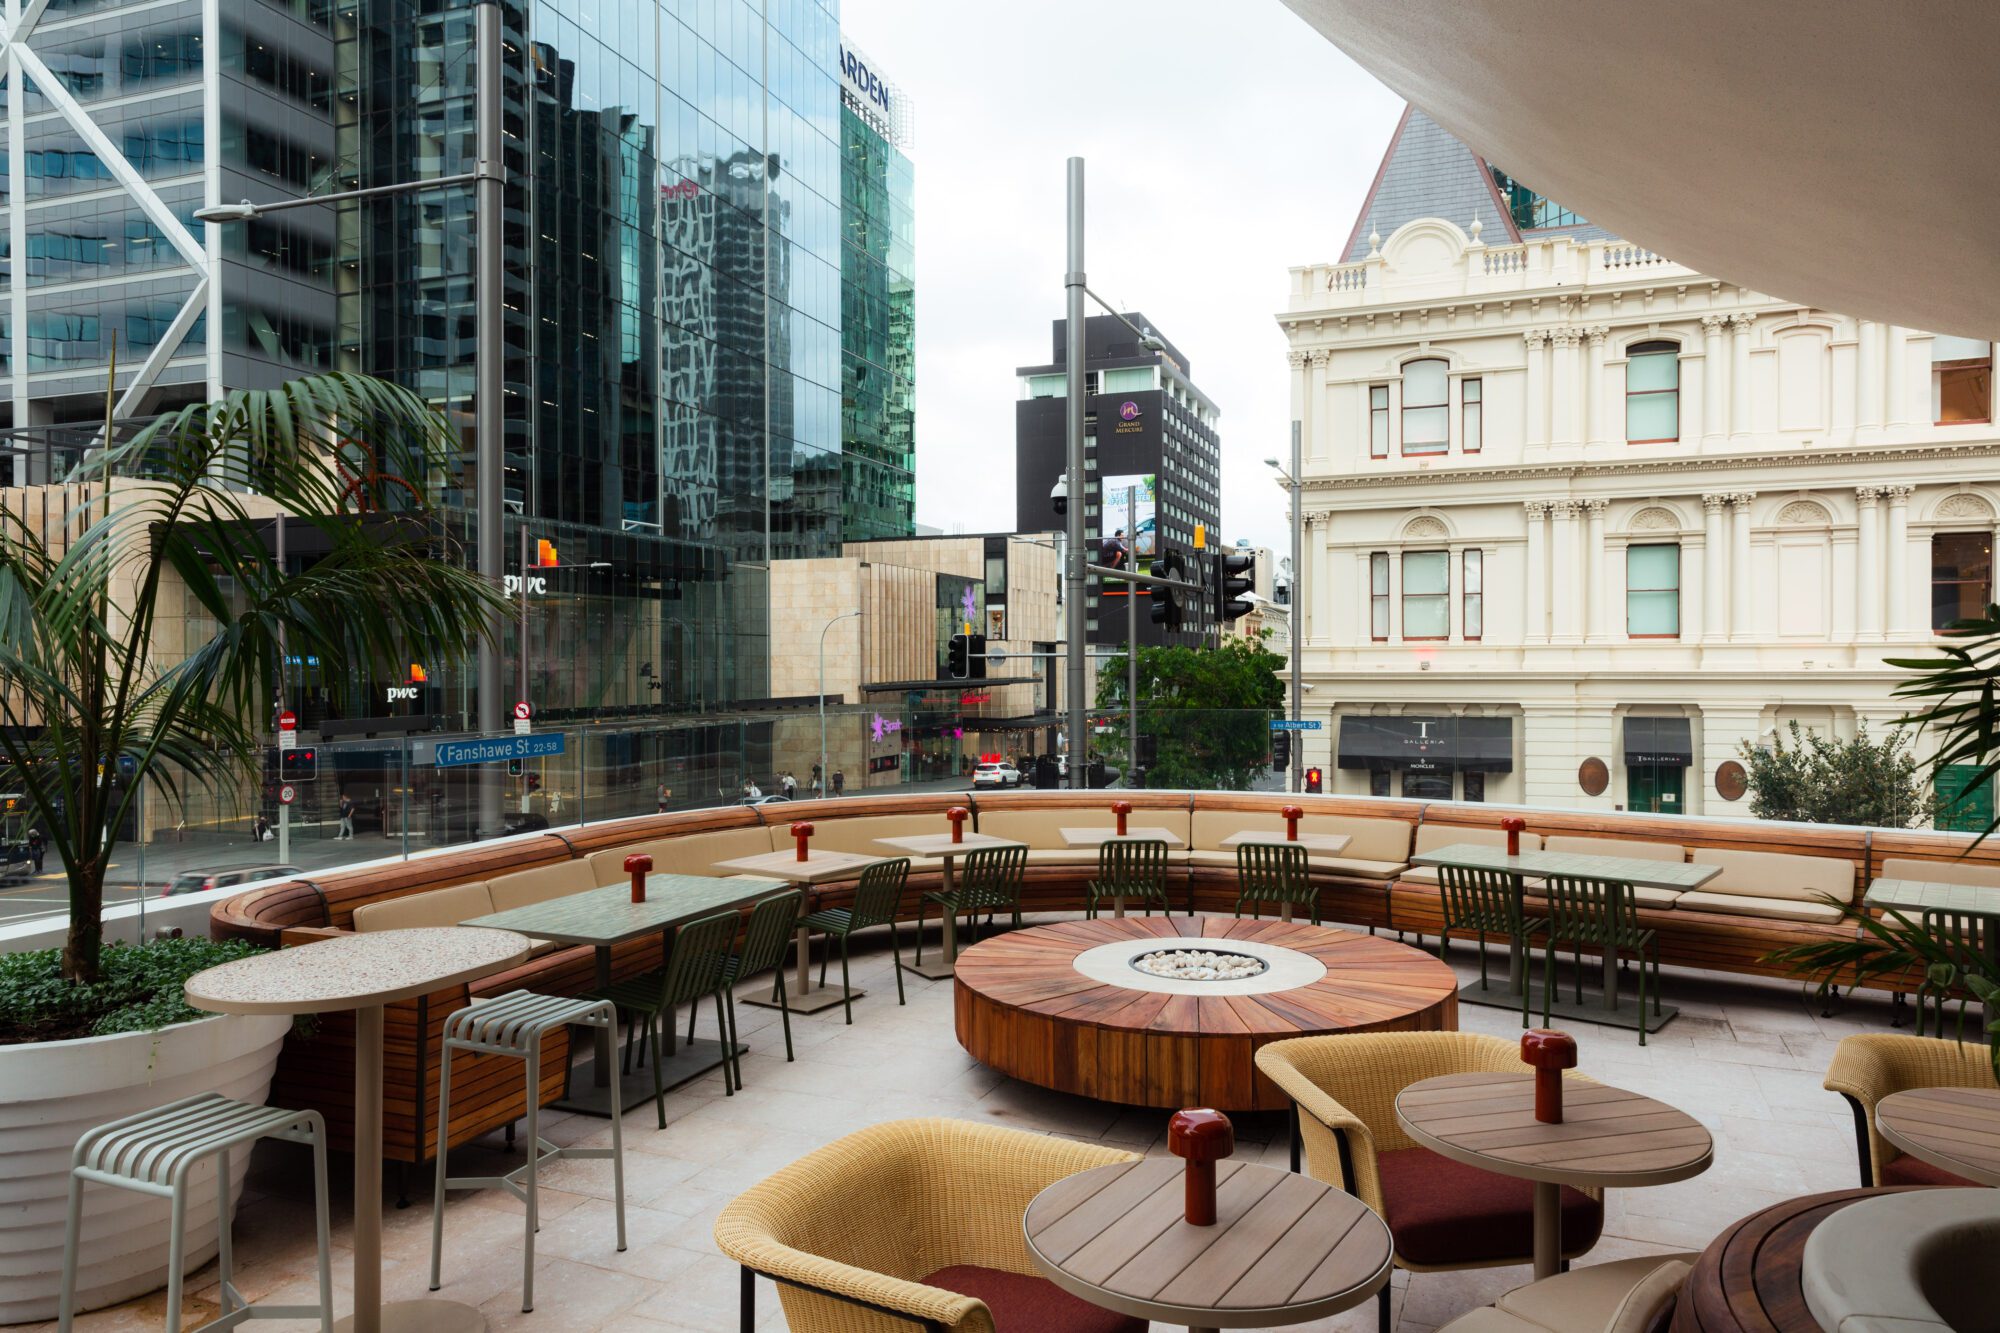 This lush rooftop bar and restaurant brings Palm Springs style to downtown Auckland